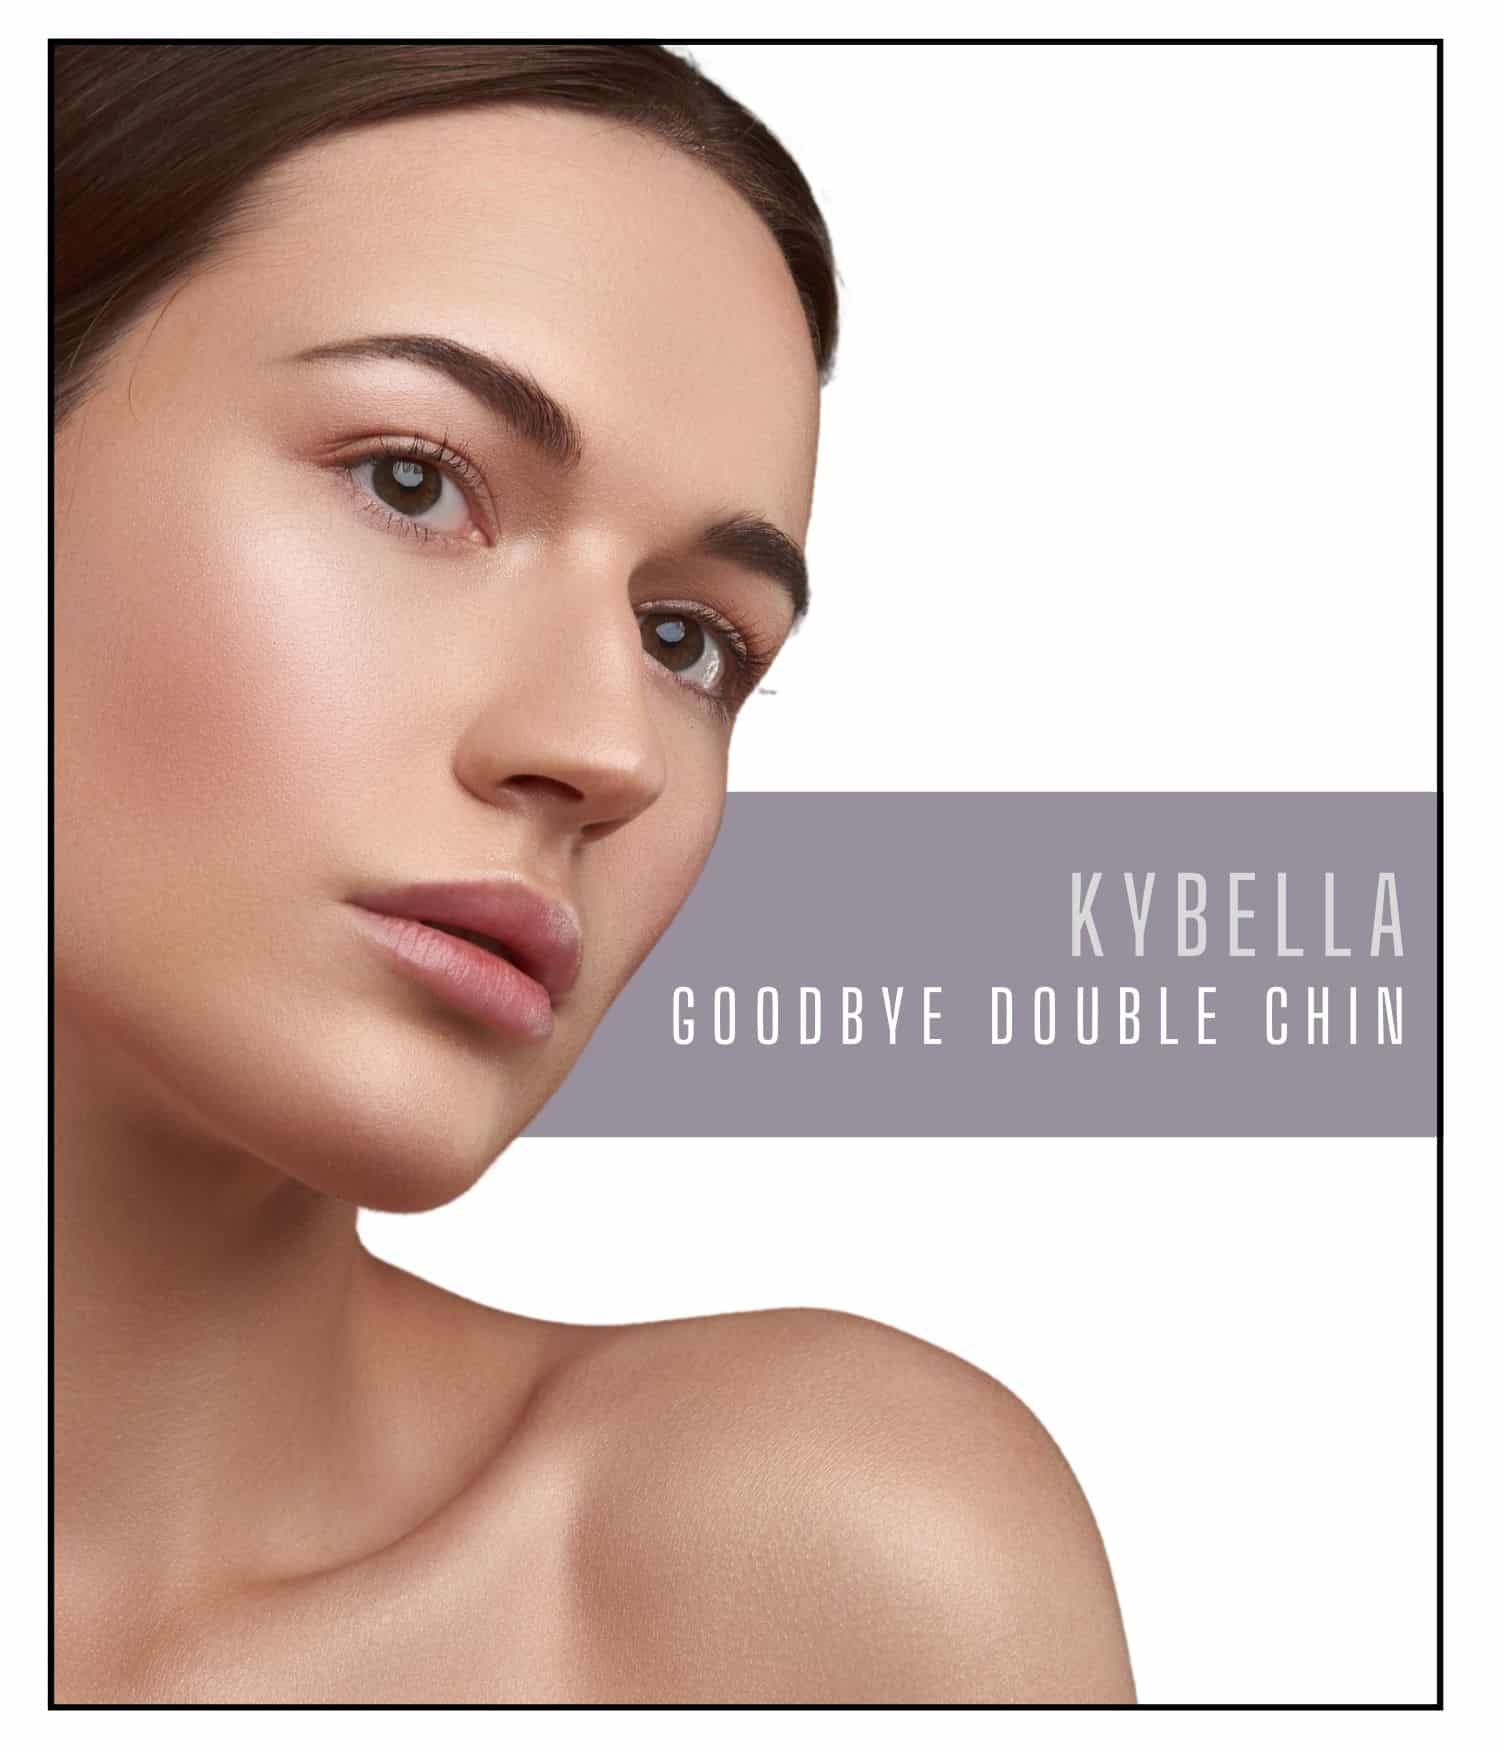 Woman with a defined chin after Kybella treatment.